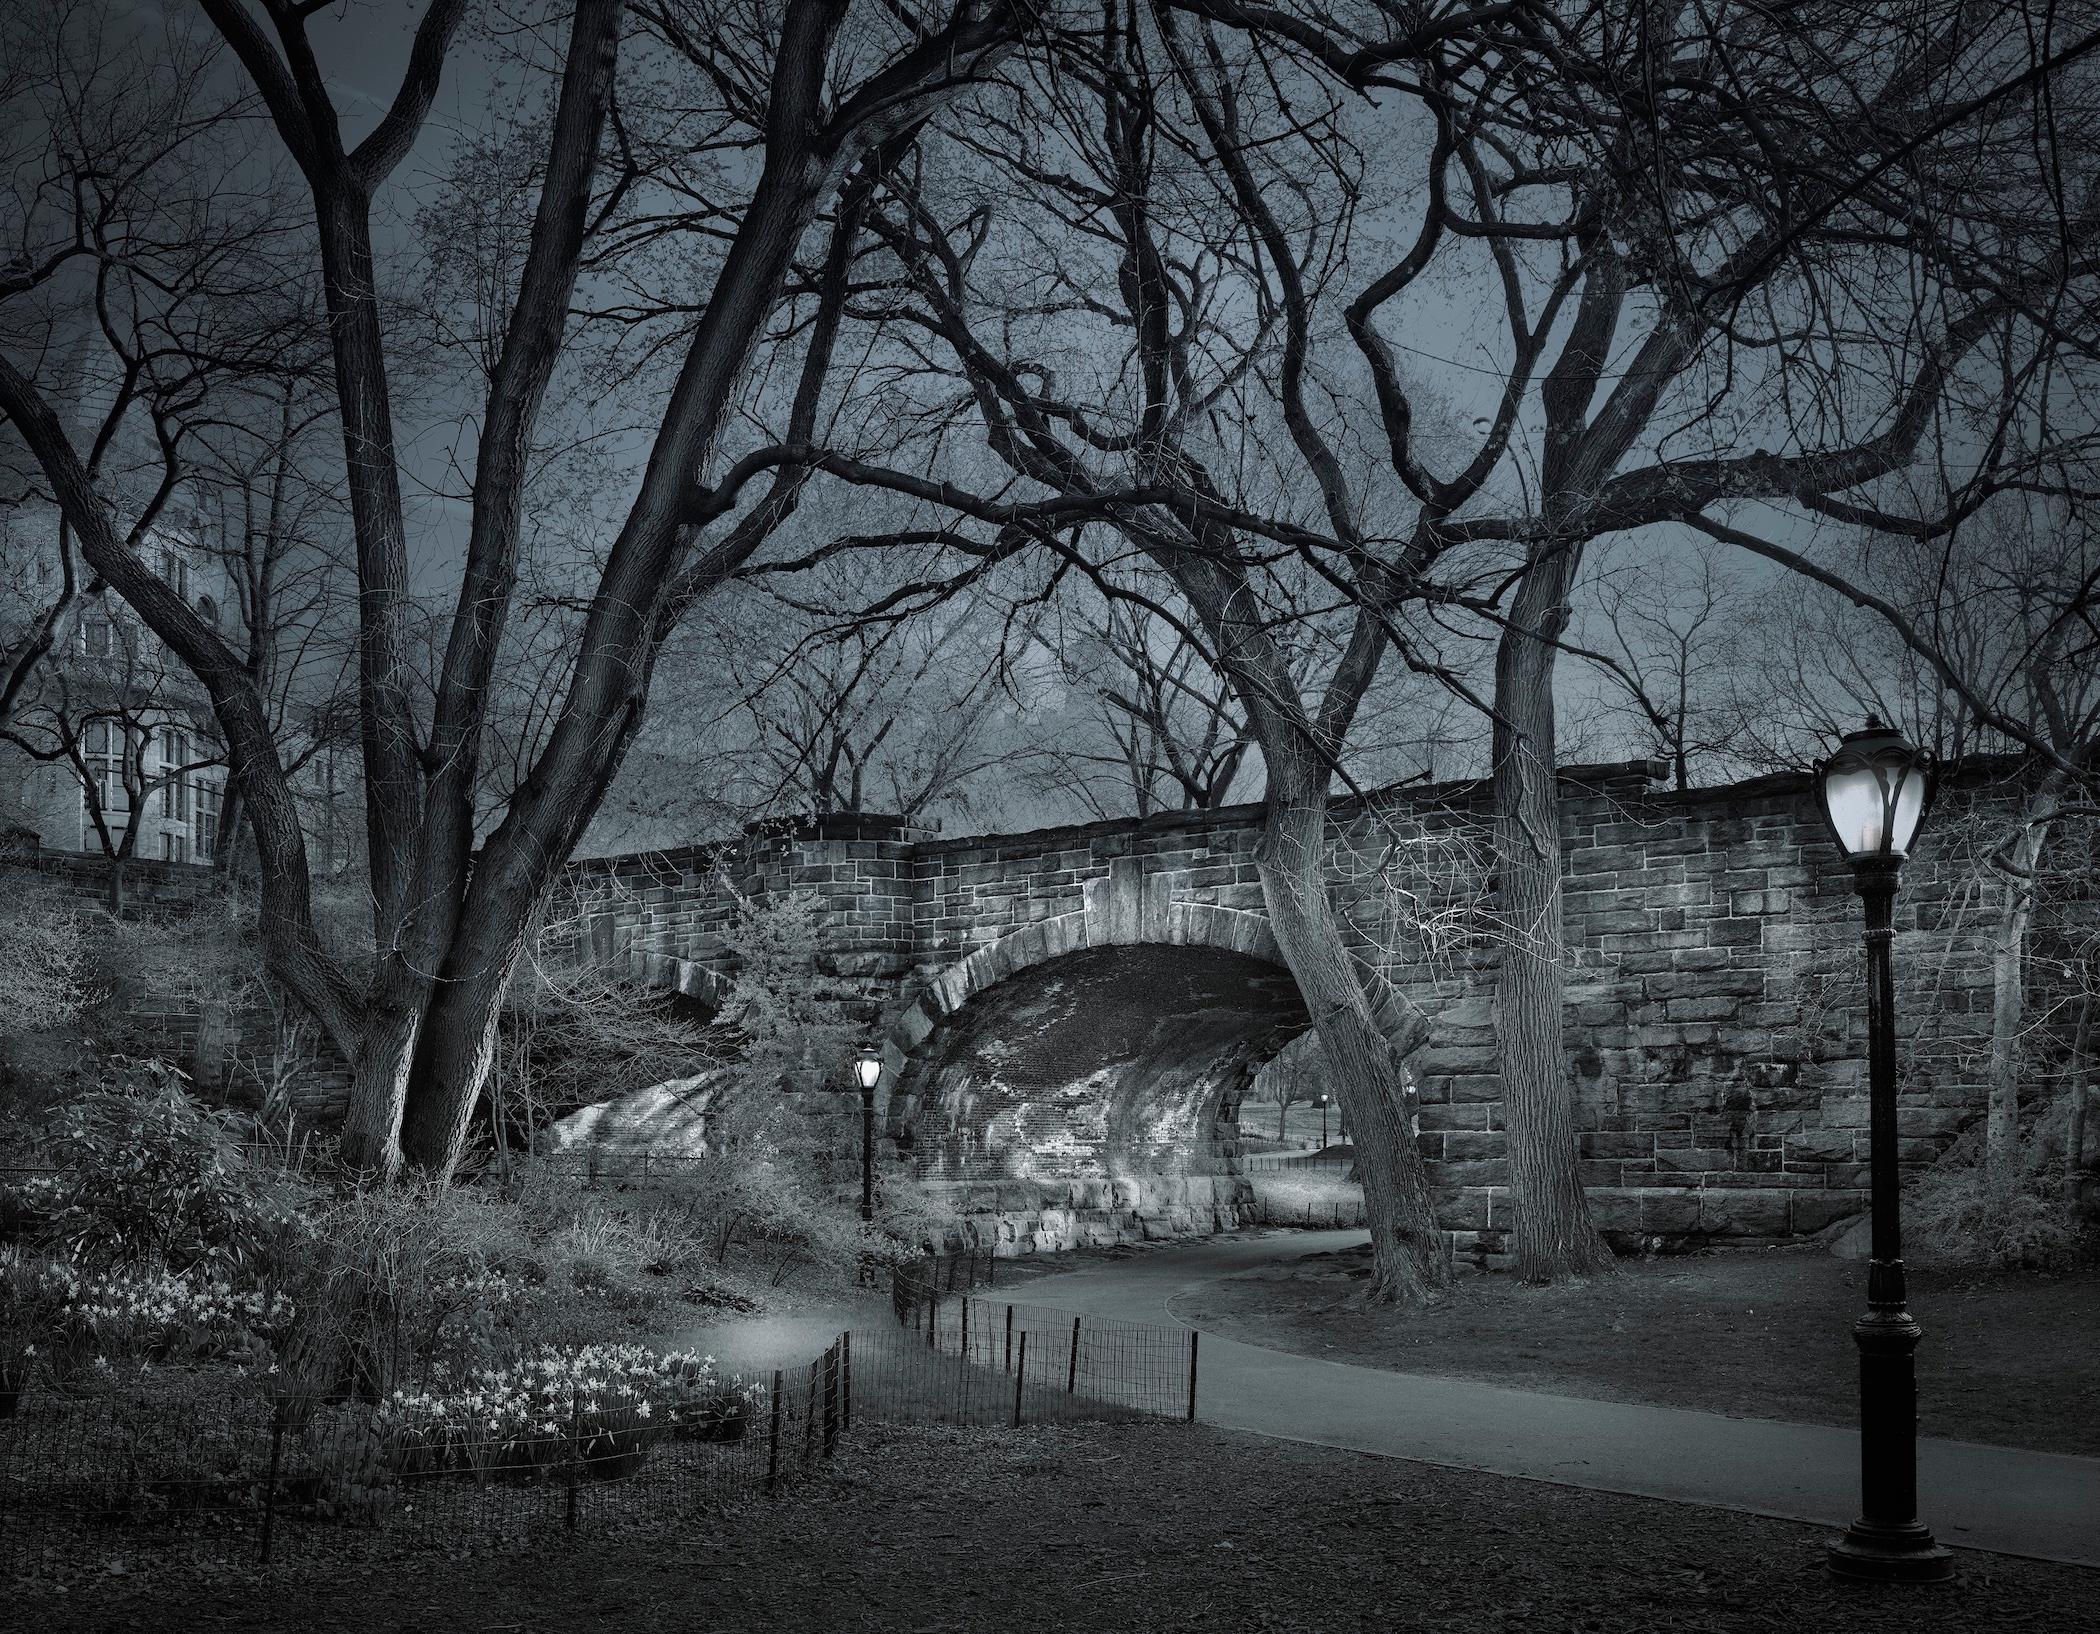 Series: Deep In A Dream-Central Park

Print Type: Selenium, Sepia, & Iron Toned Gelatin Silver 
Printed on Bergger Prestige Fiber Based Paper
Matted & Mounted 8ply Museum Board

Available Sizes:
22" x 28"	Edition of 20 + 3 AP
32" x 40"	Edition of 10